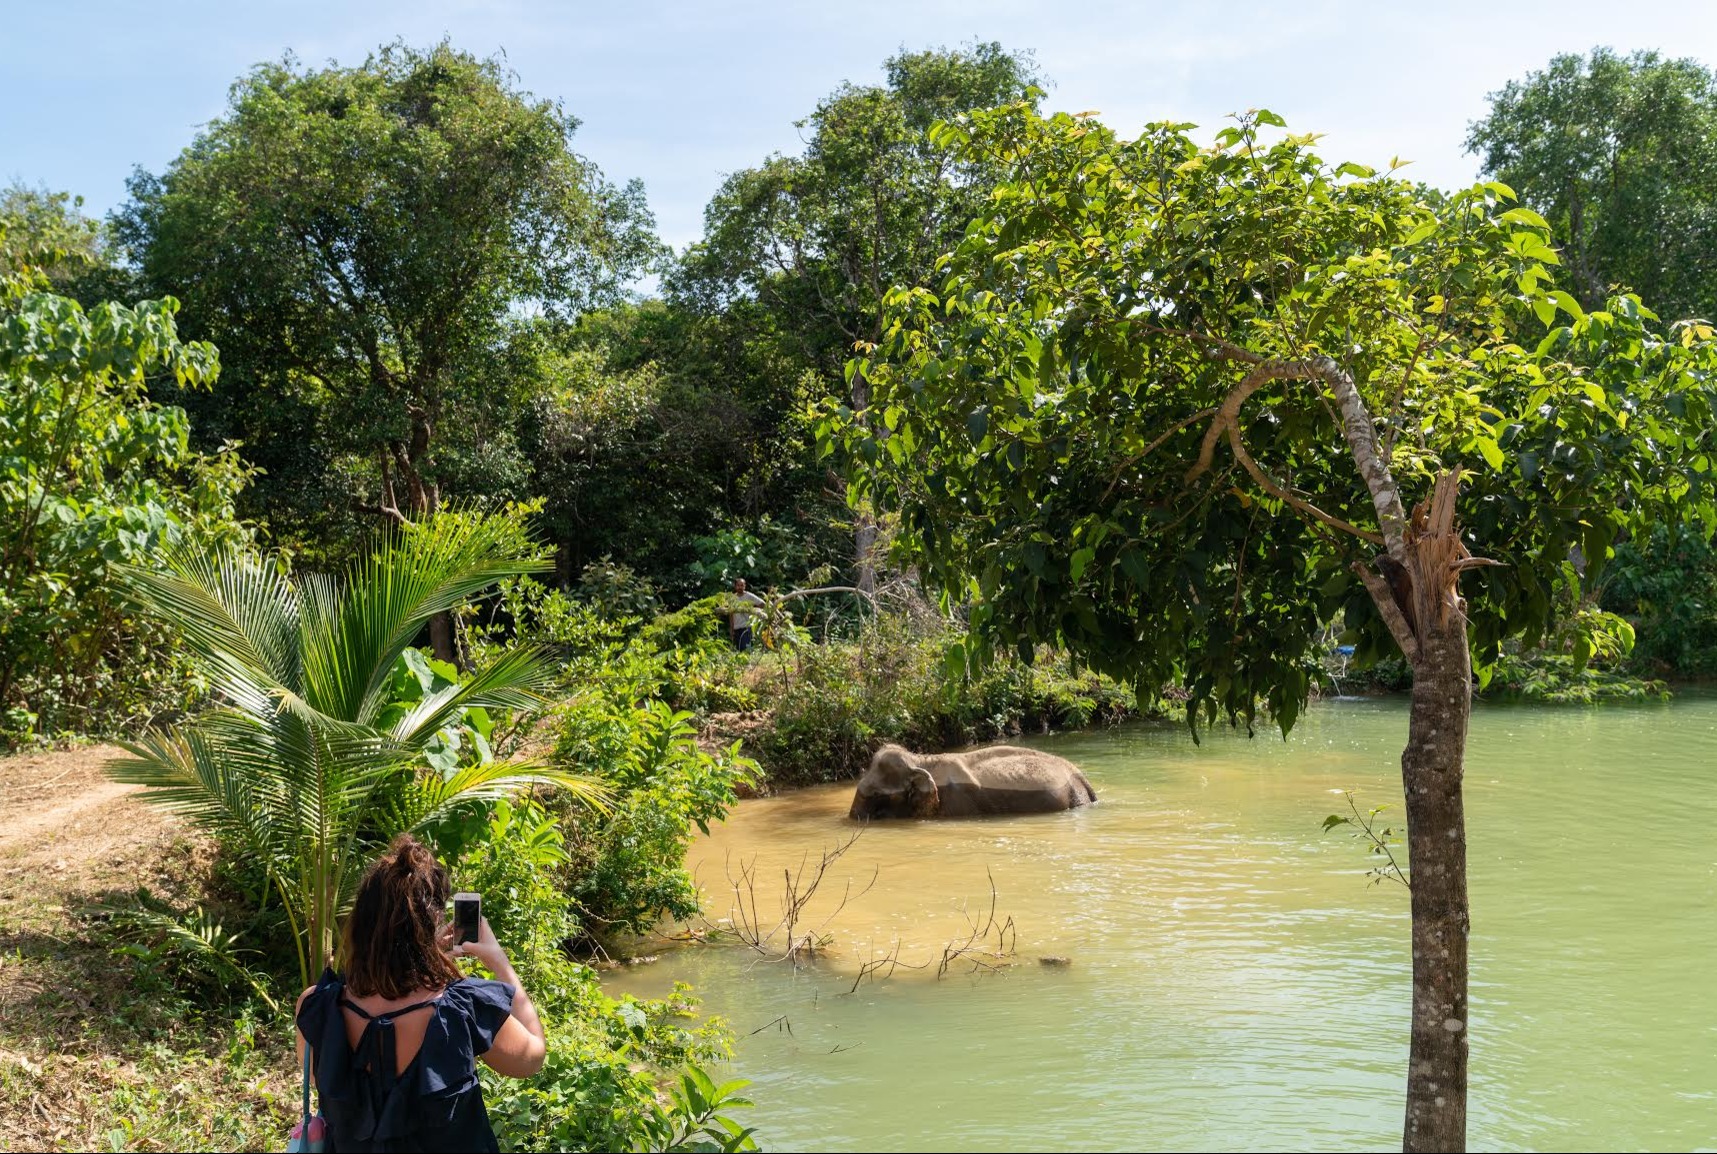 An elephant named Sow walks in the water while a tourist takes a photo from a safe distance.  Photo: Nick Axelrod.